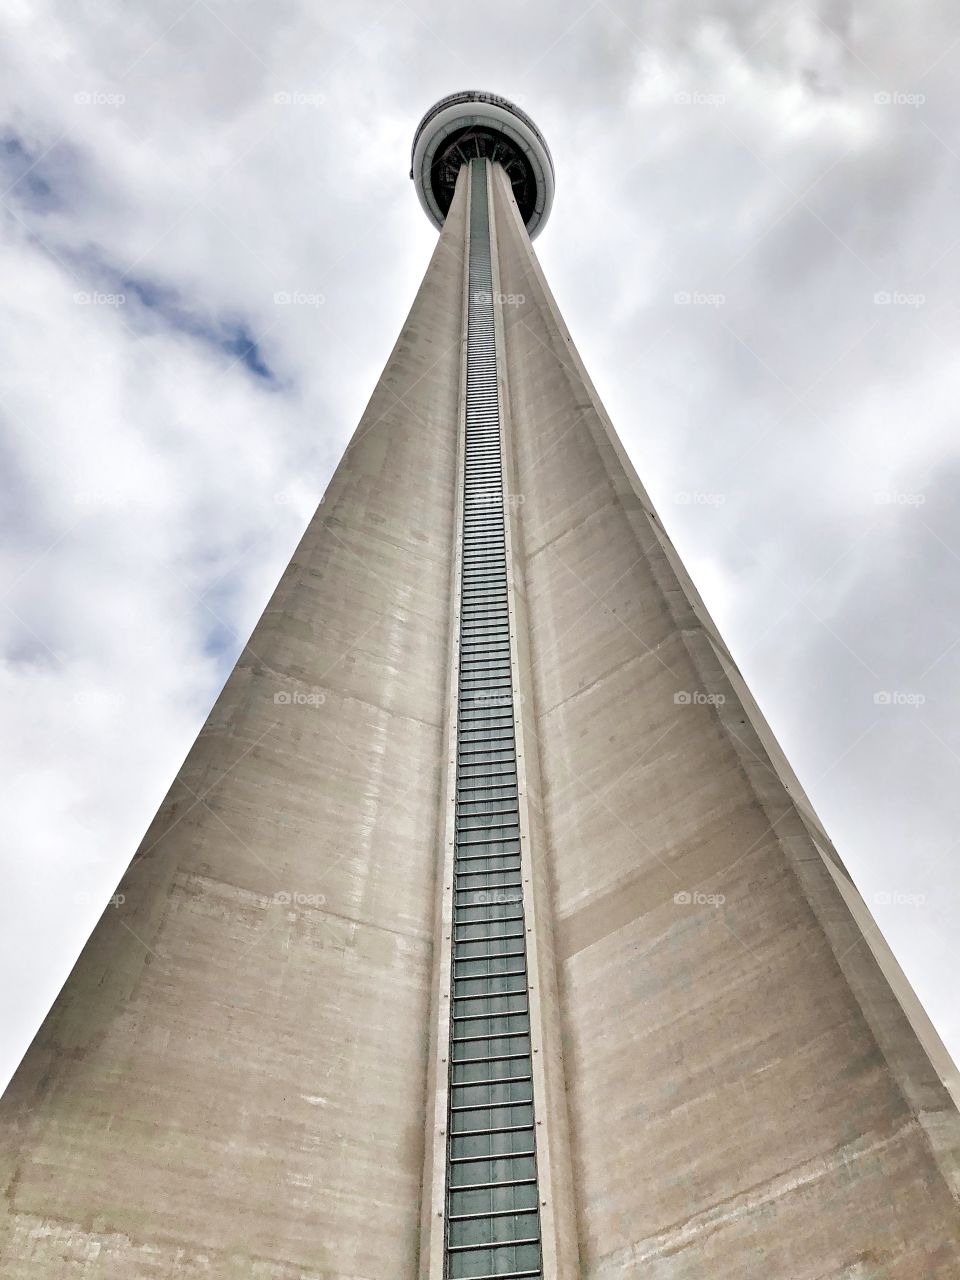 Explore the heights. CN Tower dowtown Toronto. 